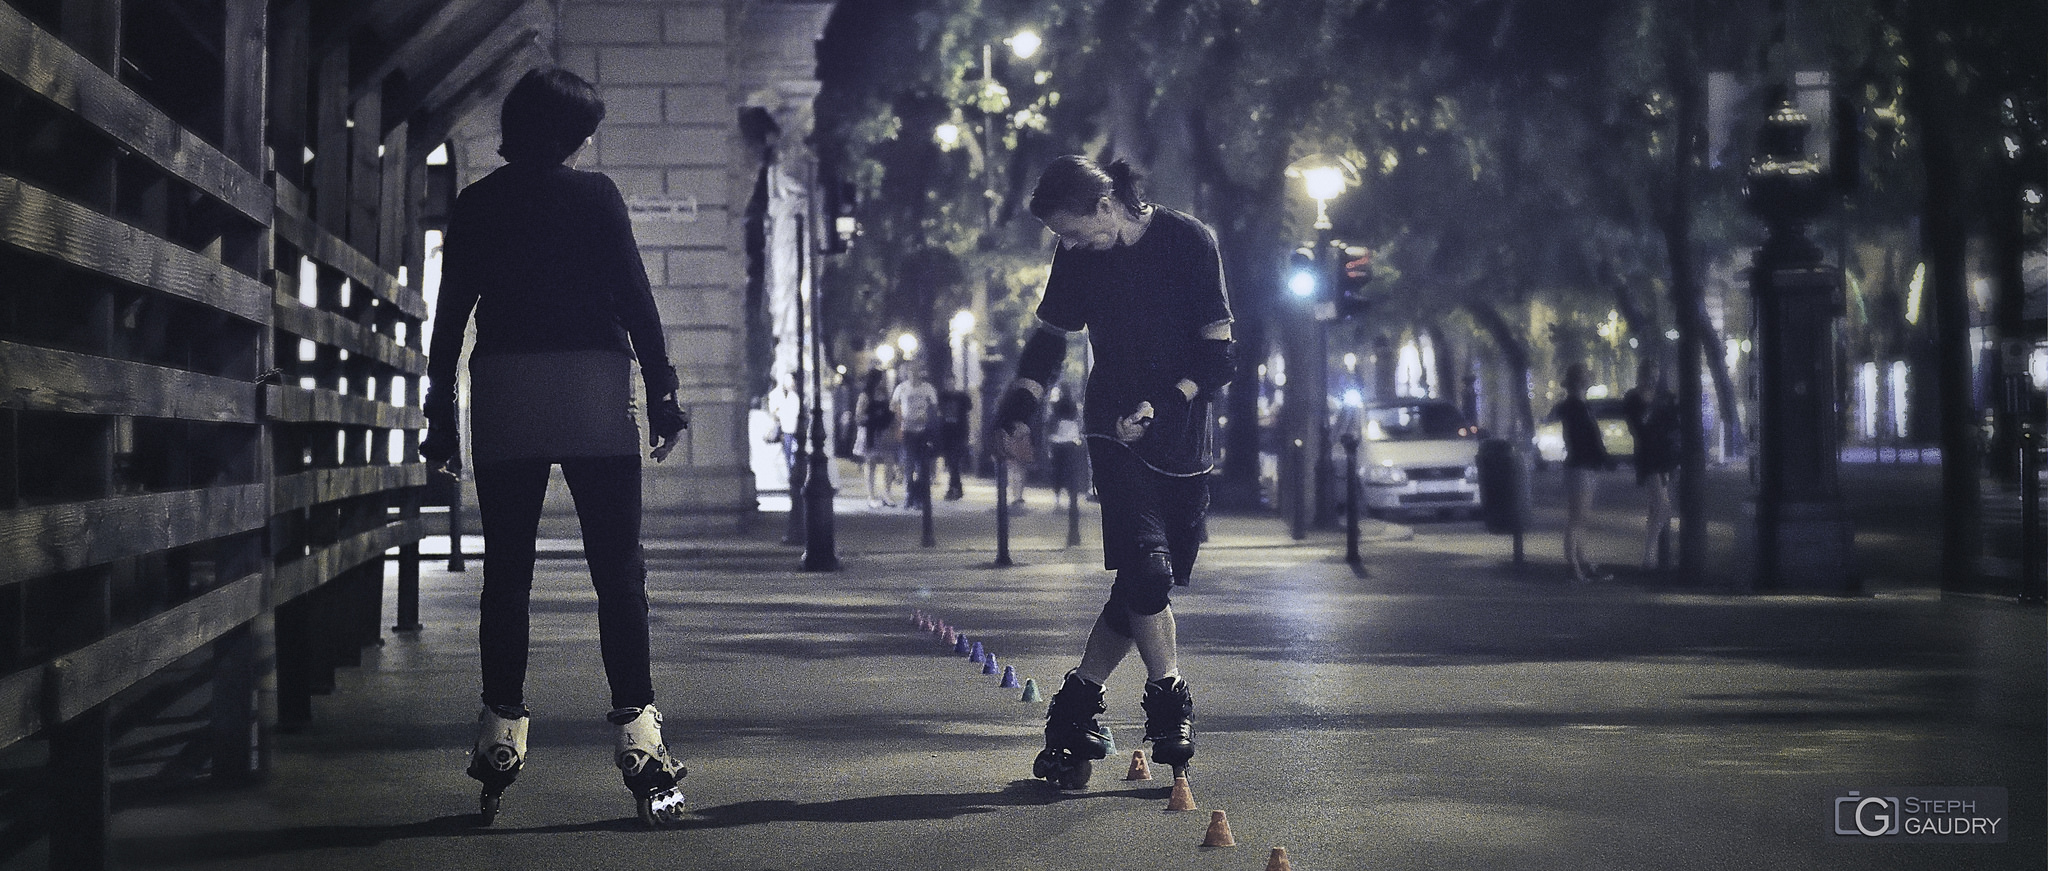 Skating in the streets of Budapest at night [Cliquez pour lancer le diaporama]